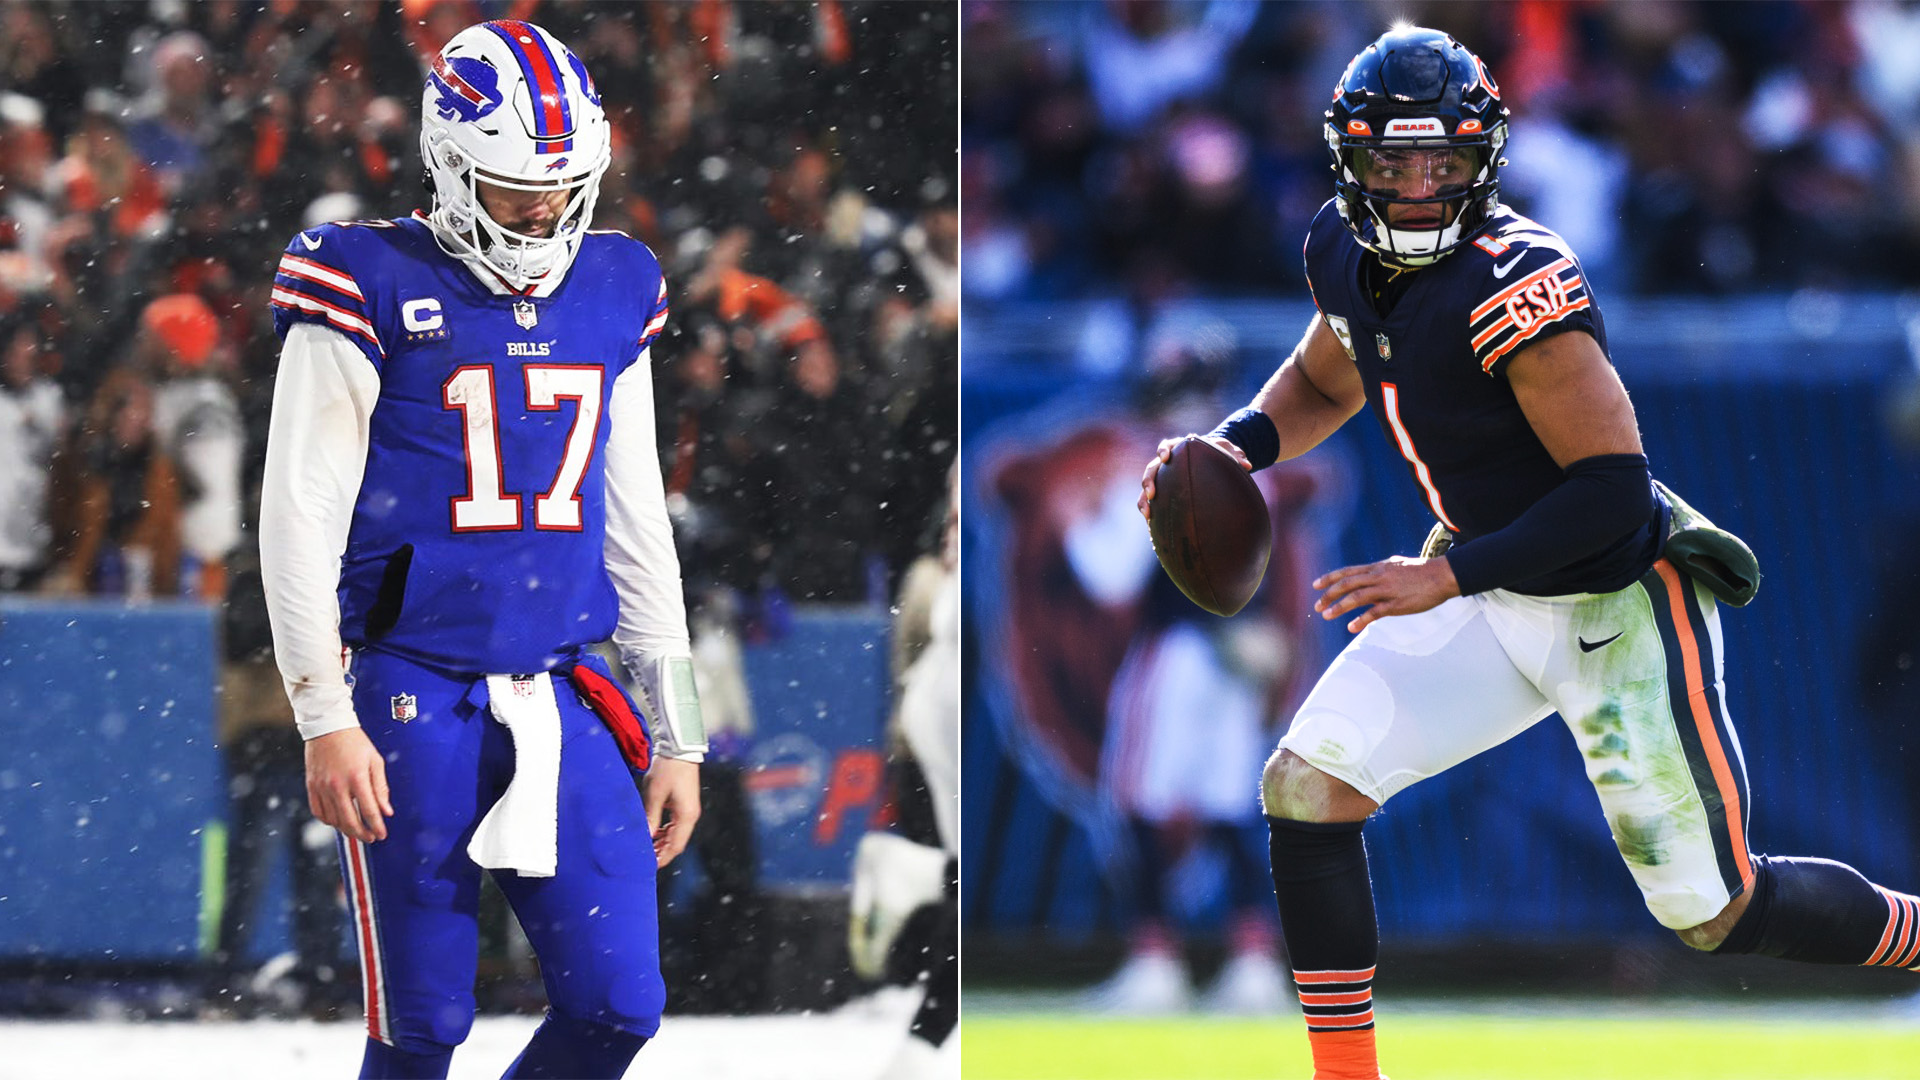 Bills' playoff exit should be important rebuild lesson for Bears